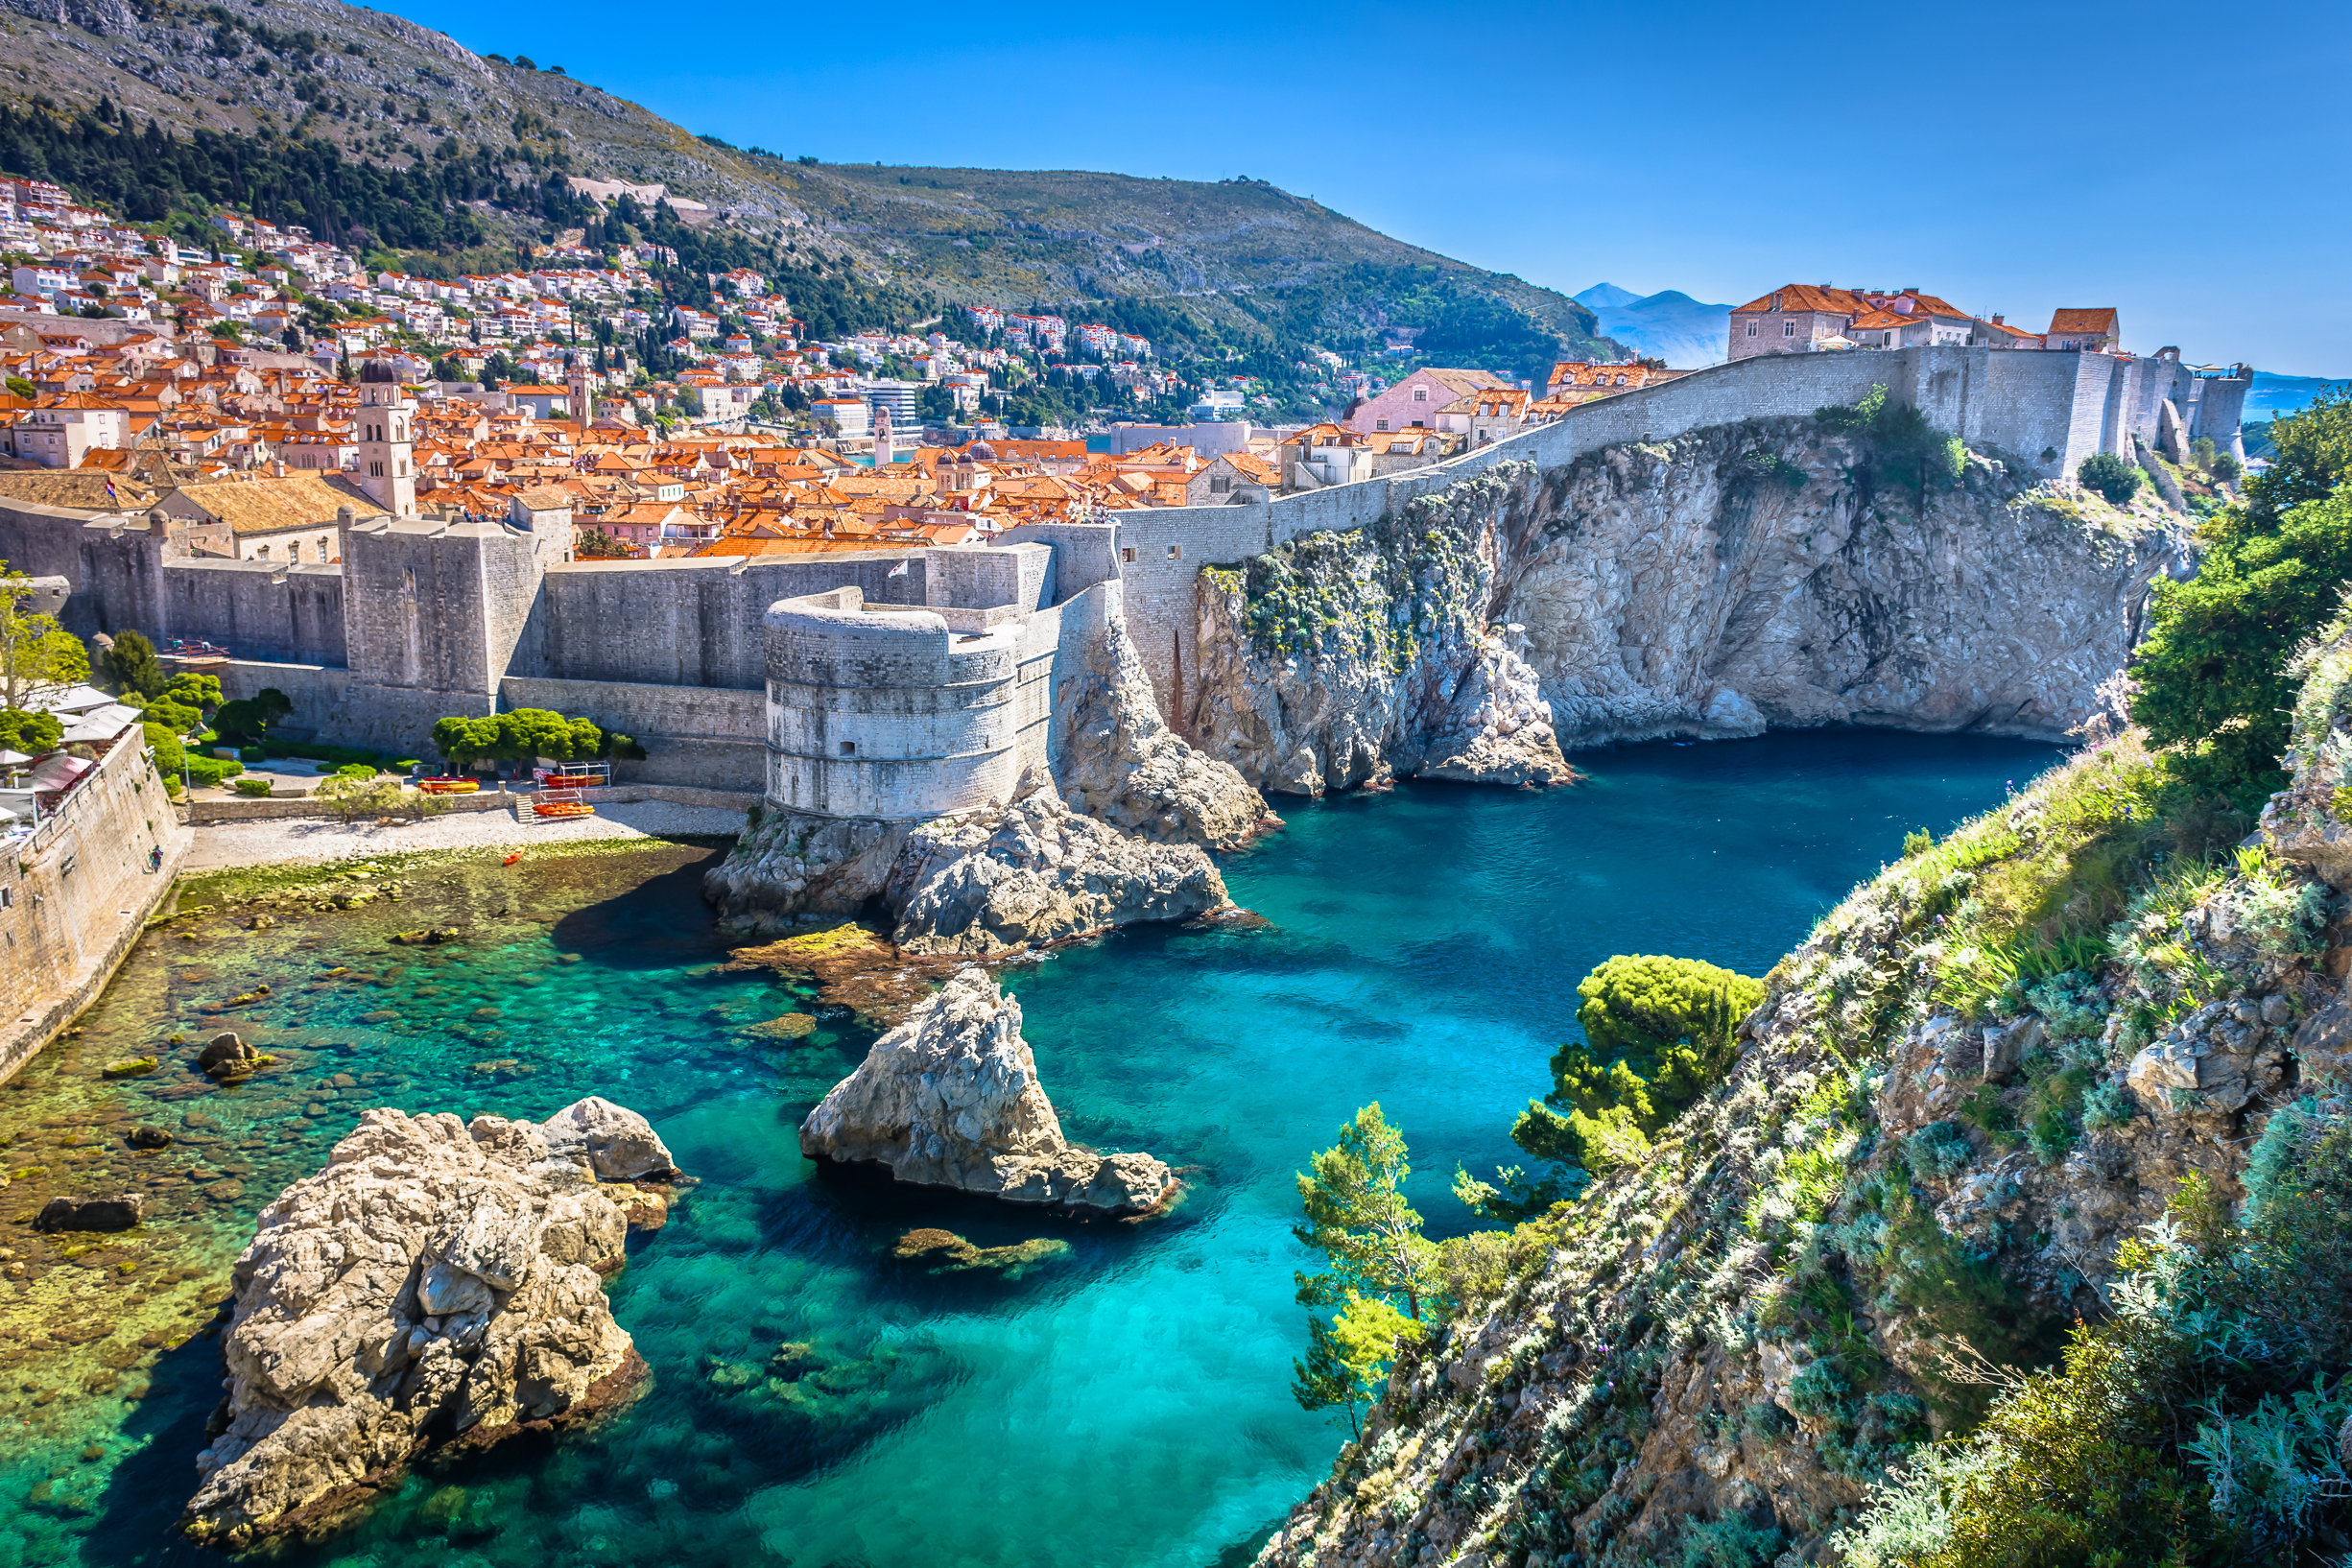 Aerial view of rock formations and stone bridge in Dubrovnik, Croatia which is one of the cheapest places to visit in Europe